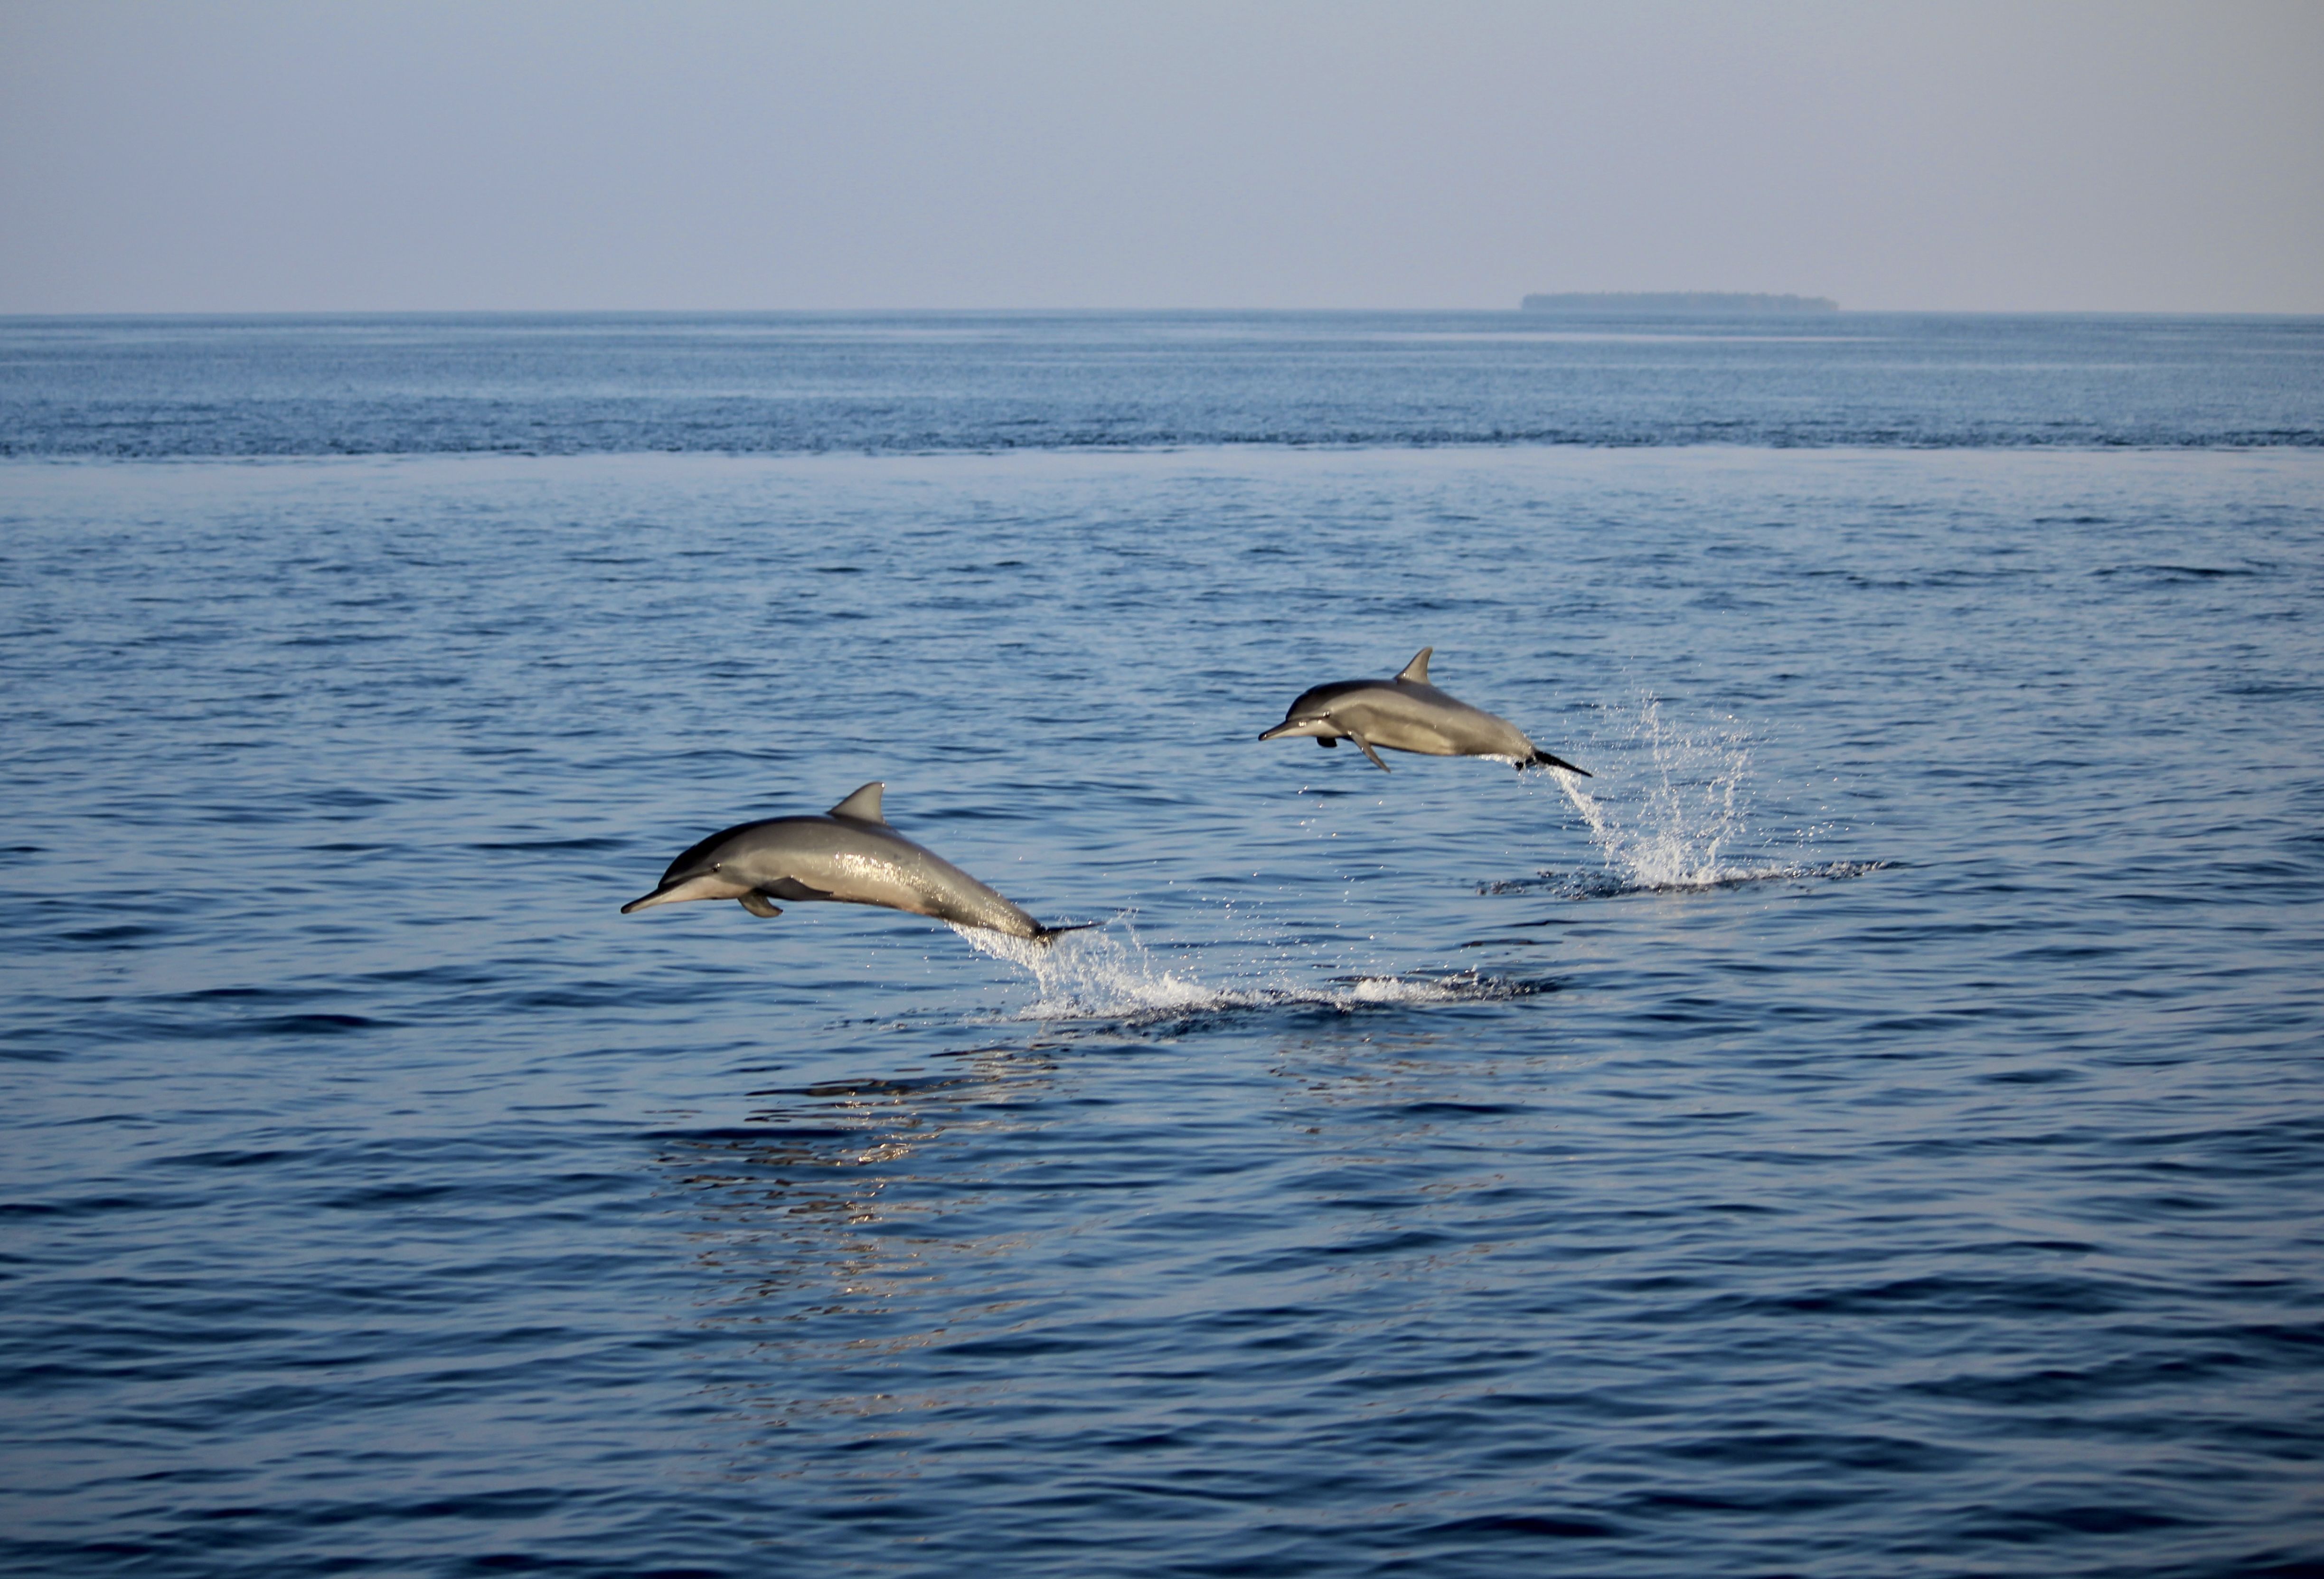 A Group Of Dolphins Jumping Out Of The Water